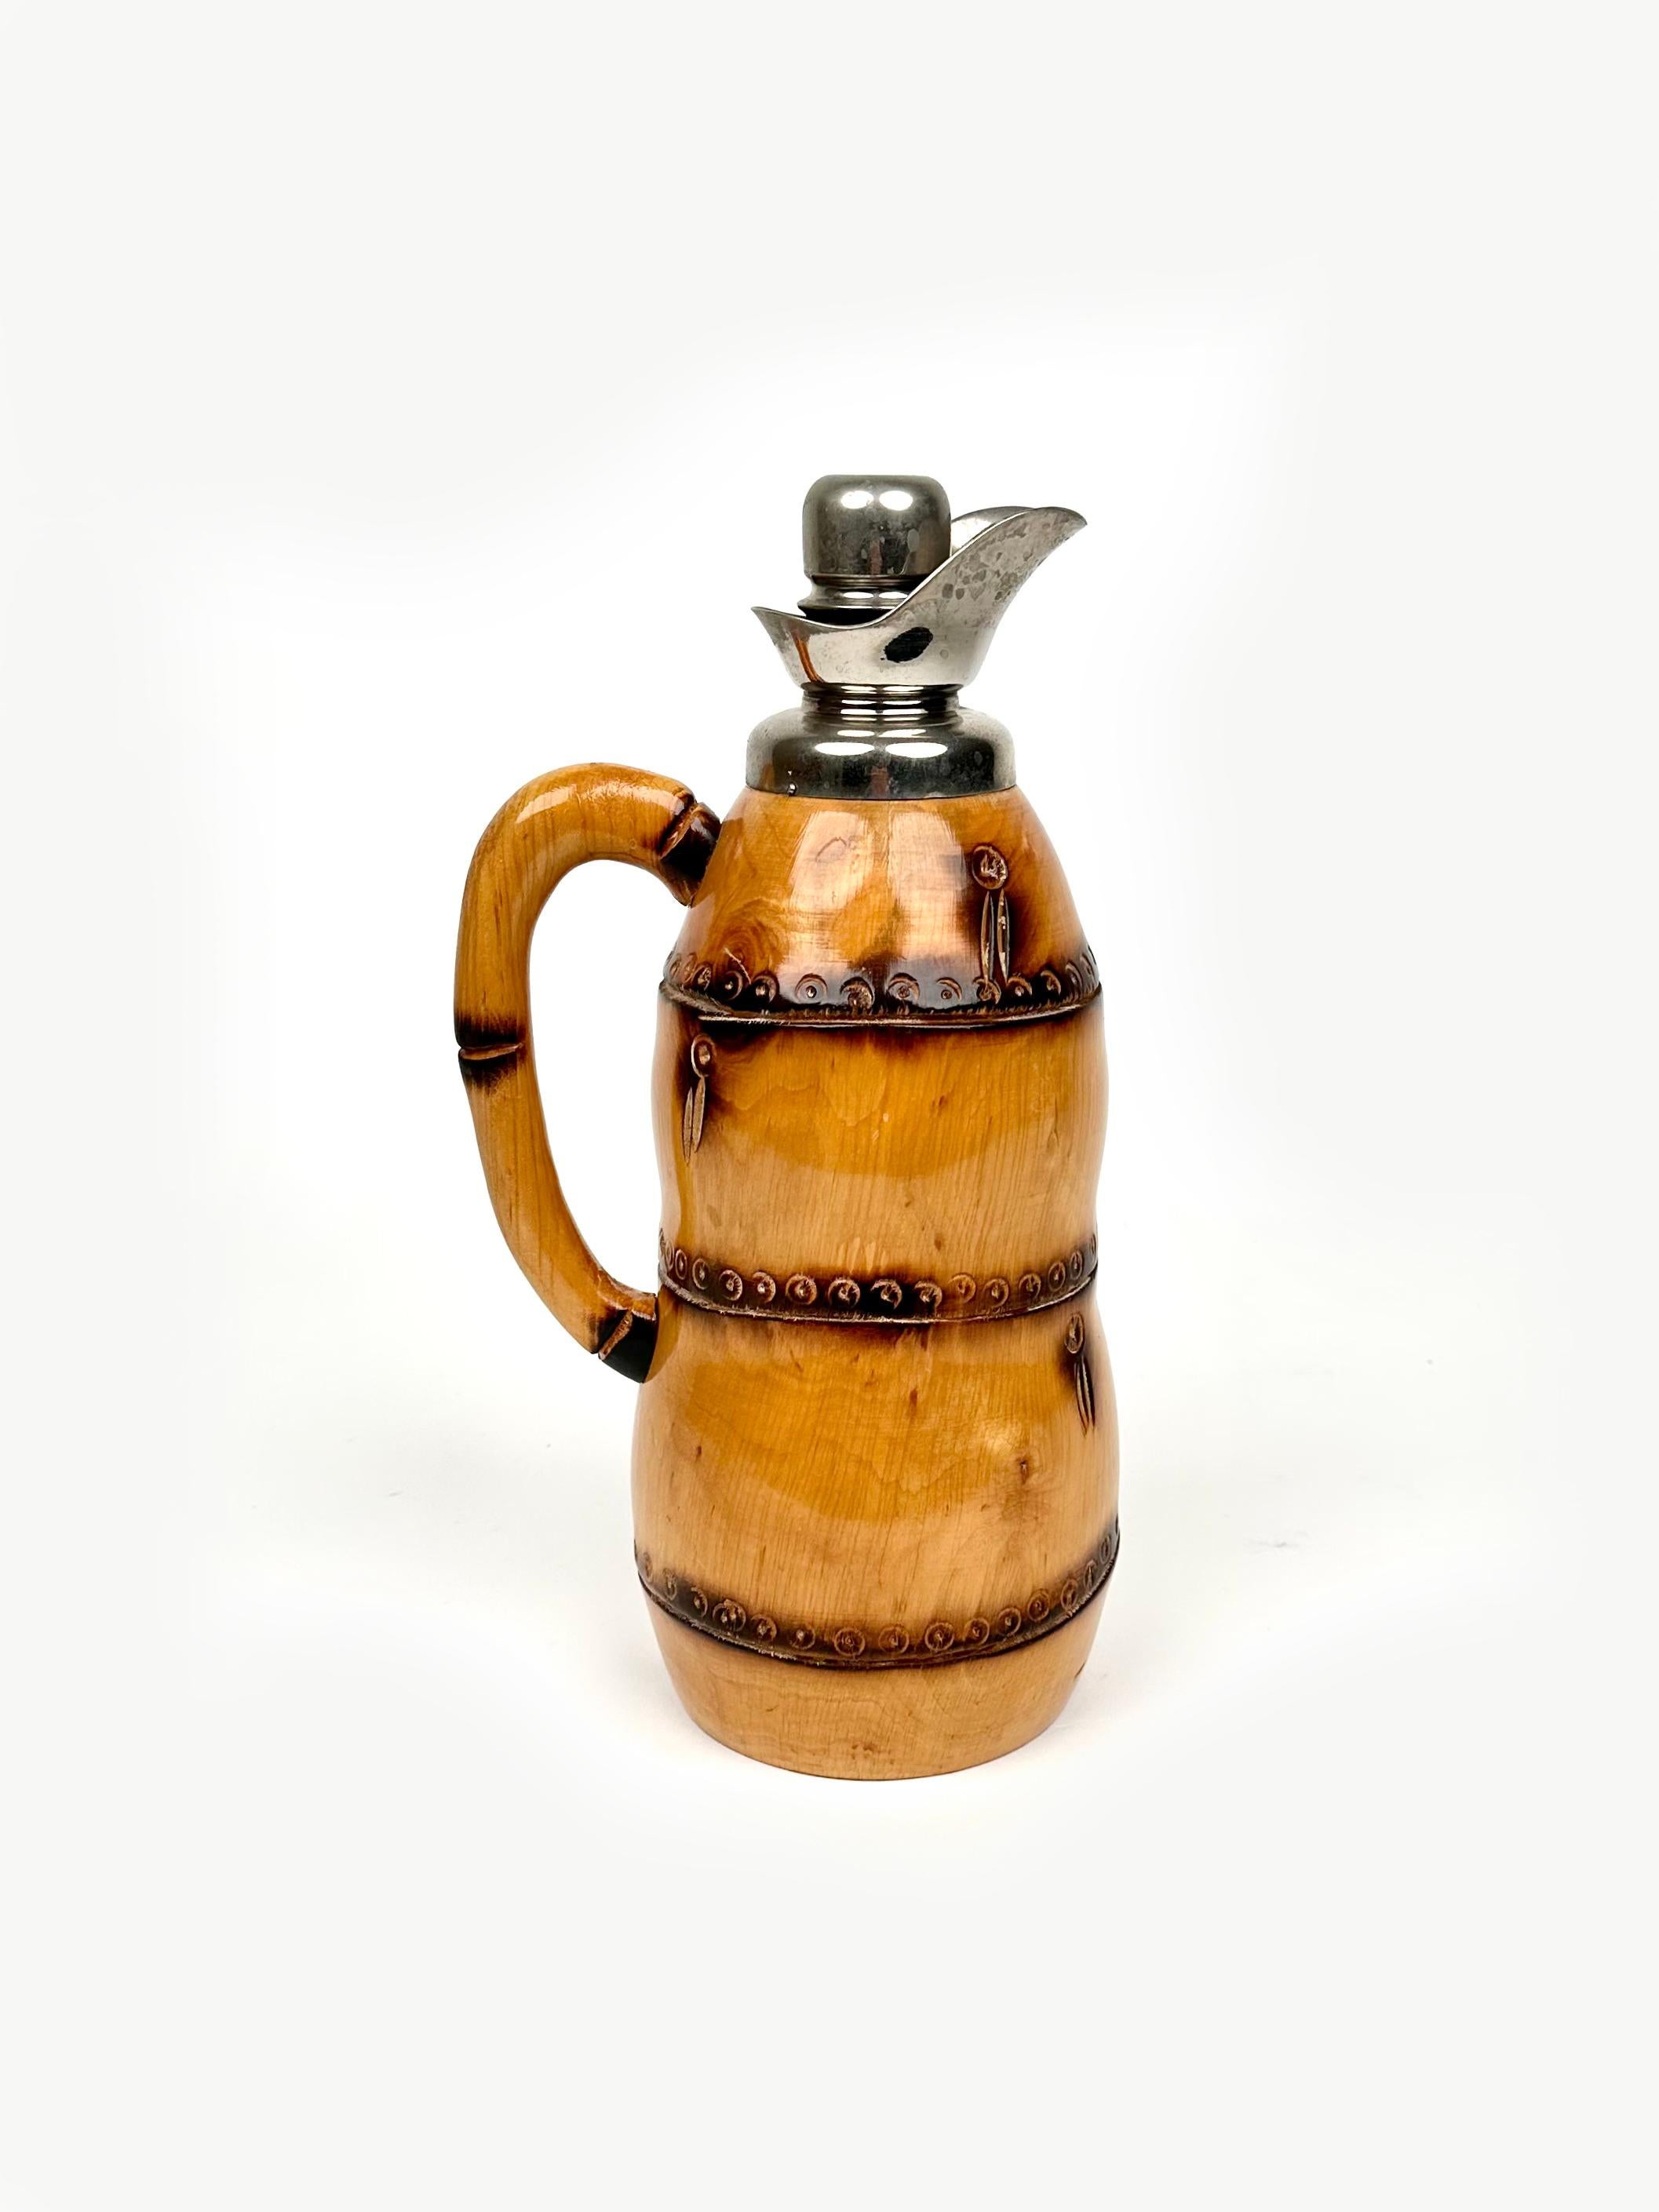 Midcentury thermos decanter in bamboo and metal by Aldo Tura For Macabo Cusano Milanino.

Made in Italy in the 1950s.